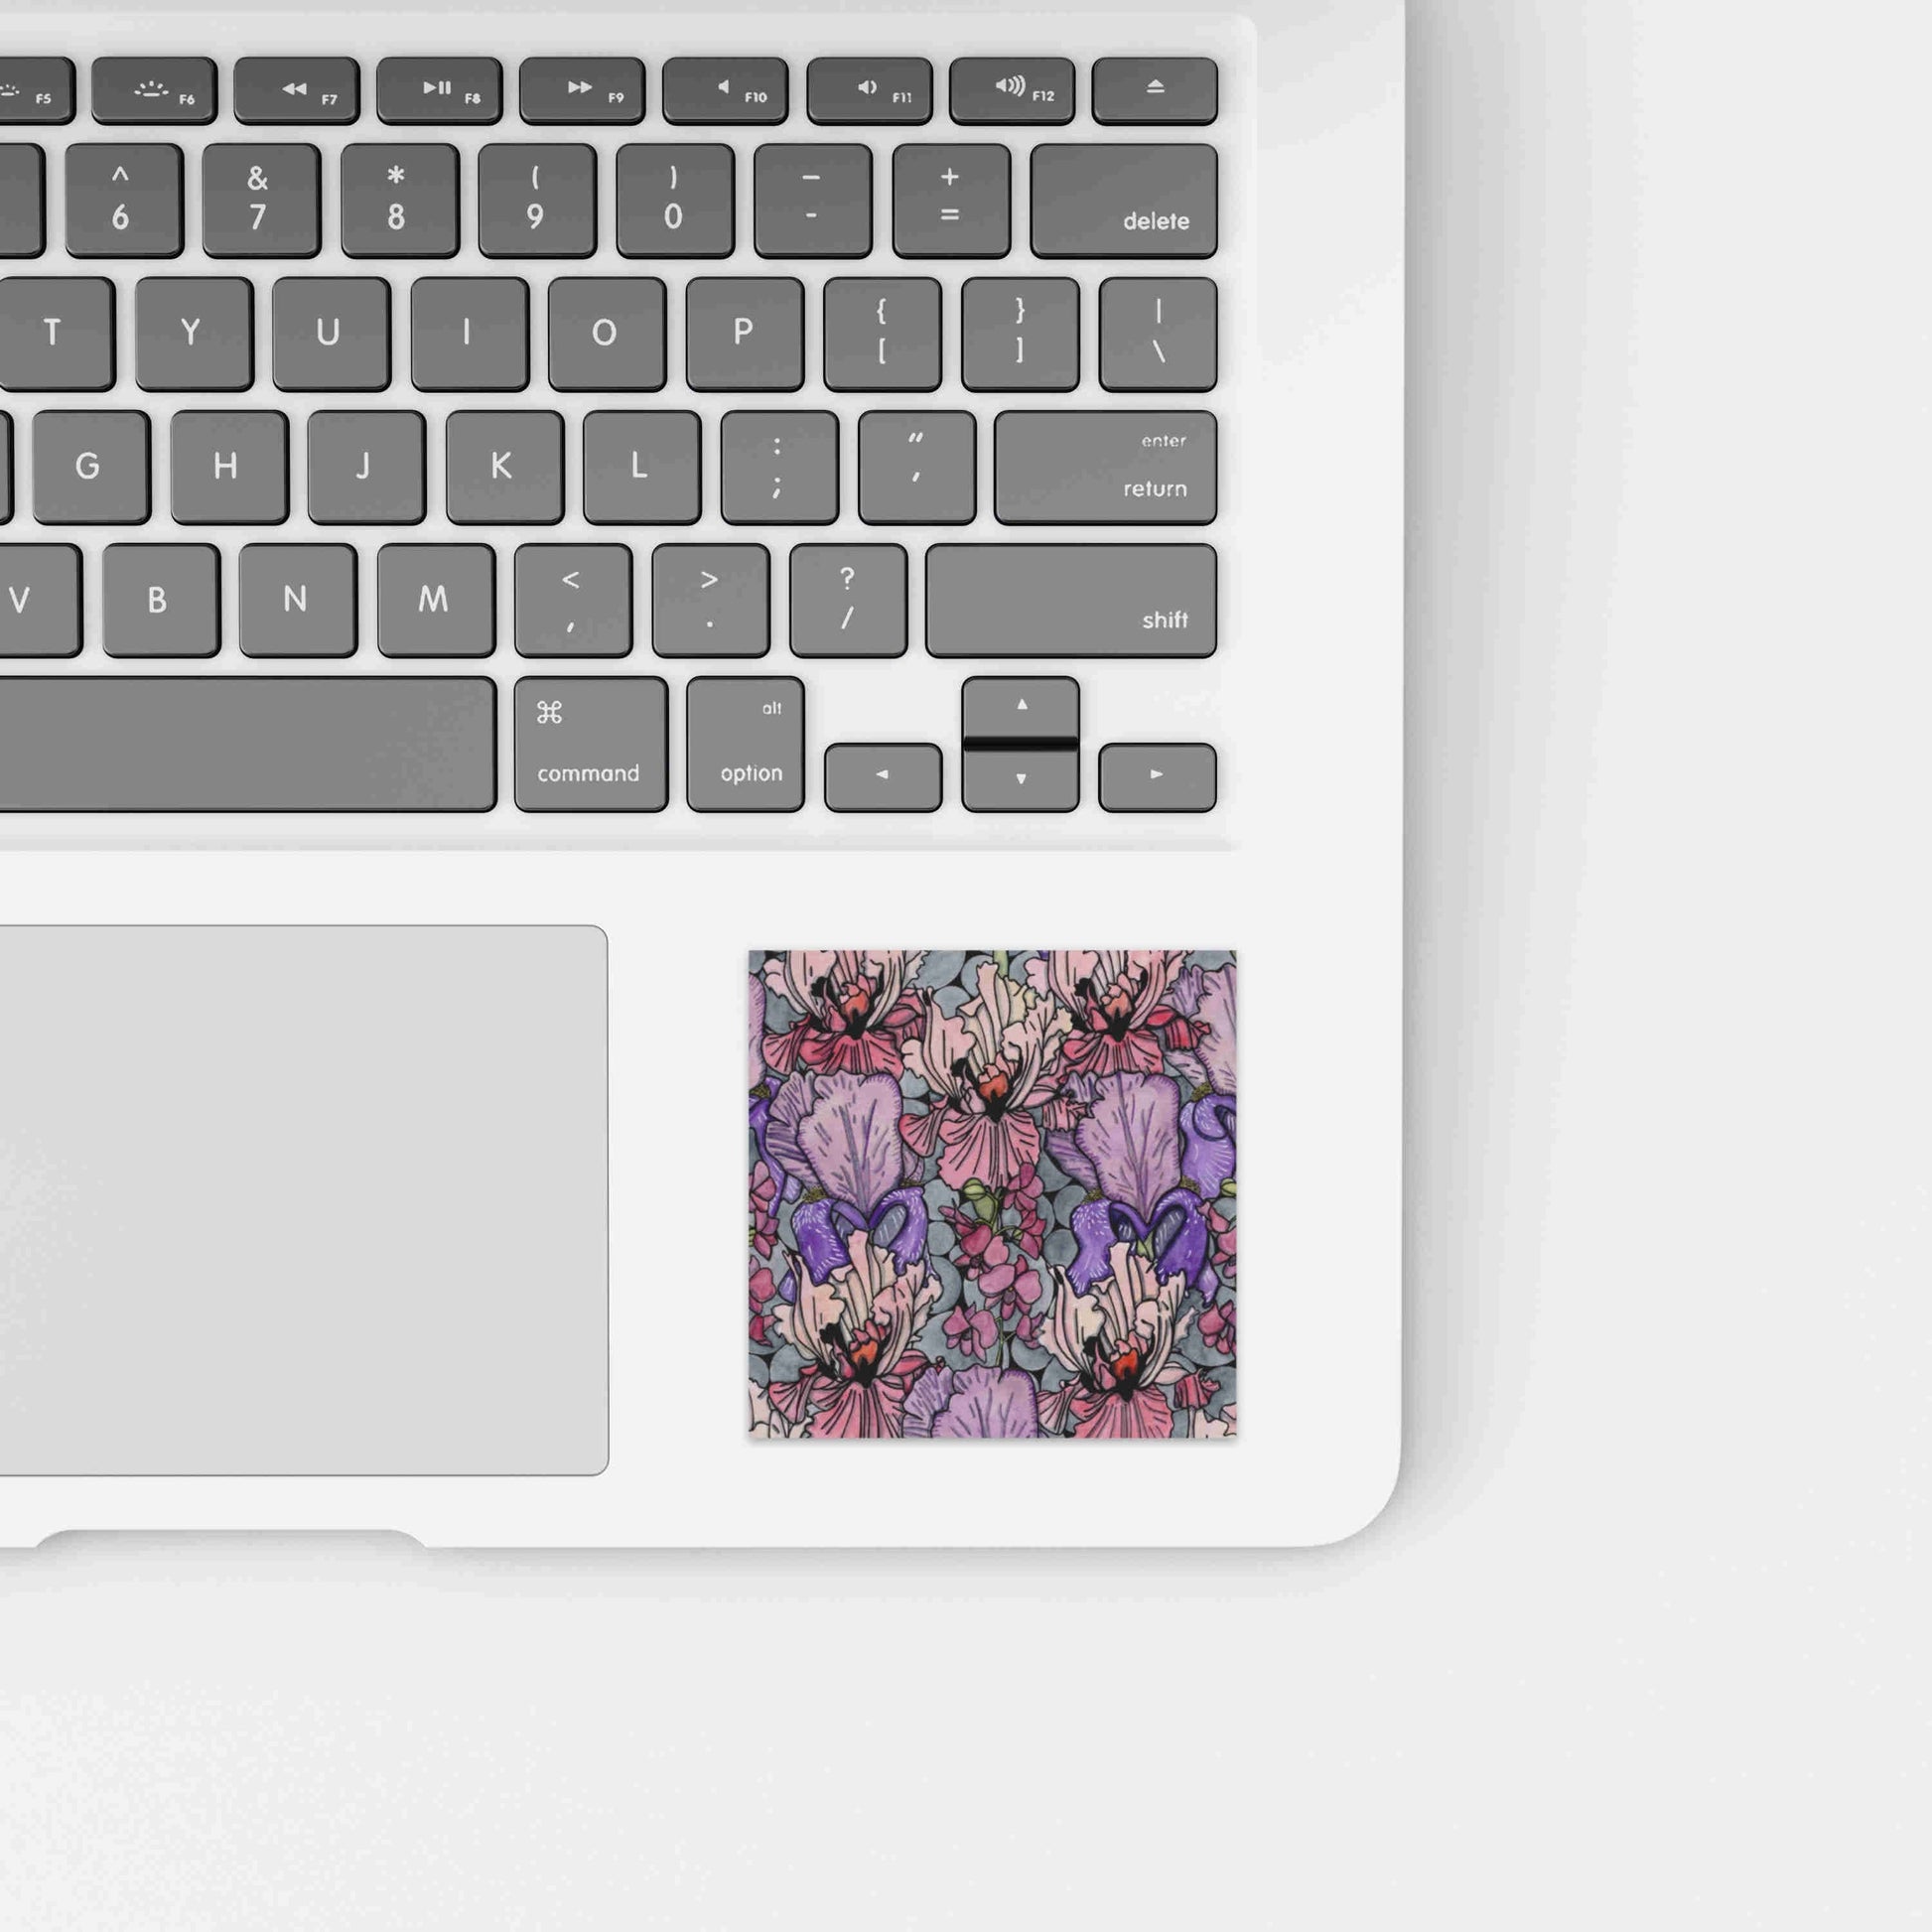 PinkPolish Design Stickers "Floral Repetition" Square Vinyl Sticker